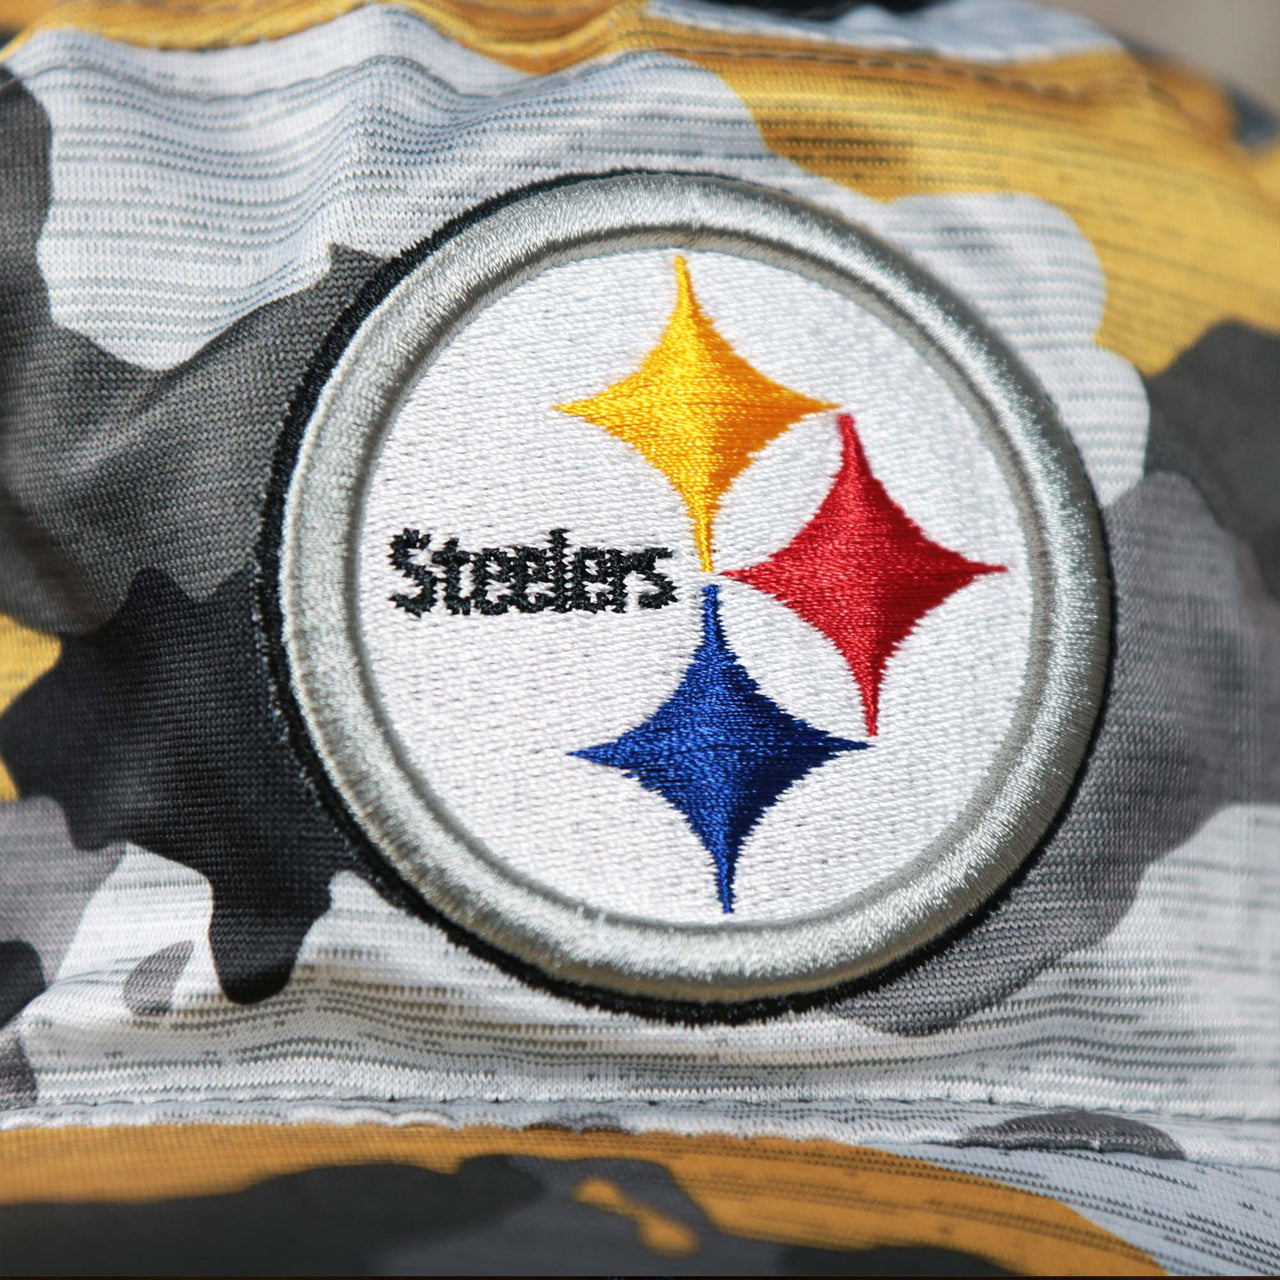 The Steelers Logo on the Pittsburgh Steelers NFL Summer Training Camp 2022 Camo Bucket Hat | Yellow Bucket Hat